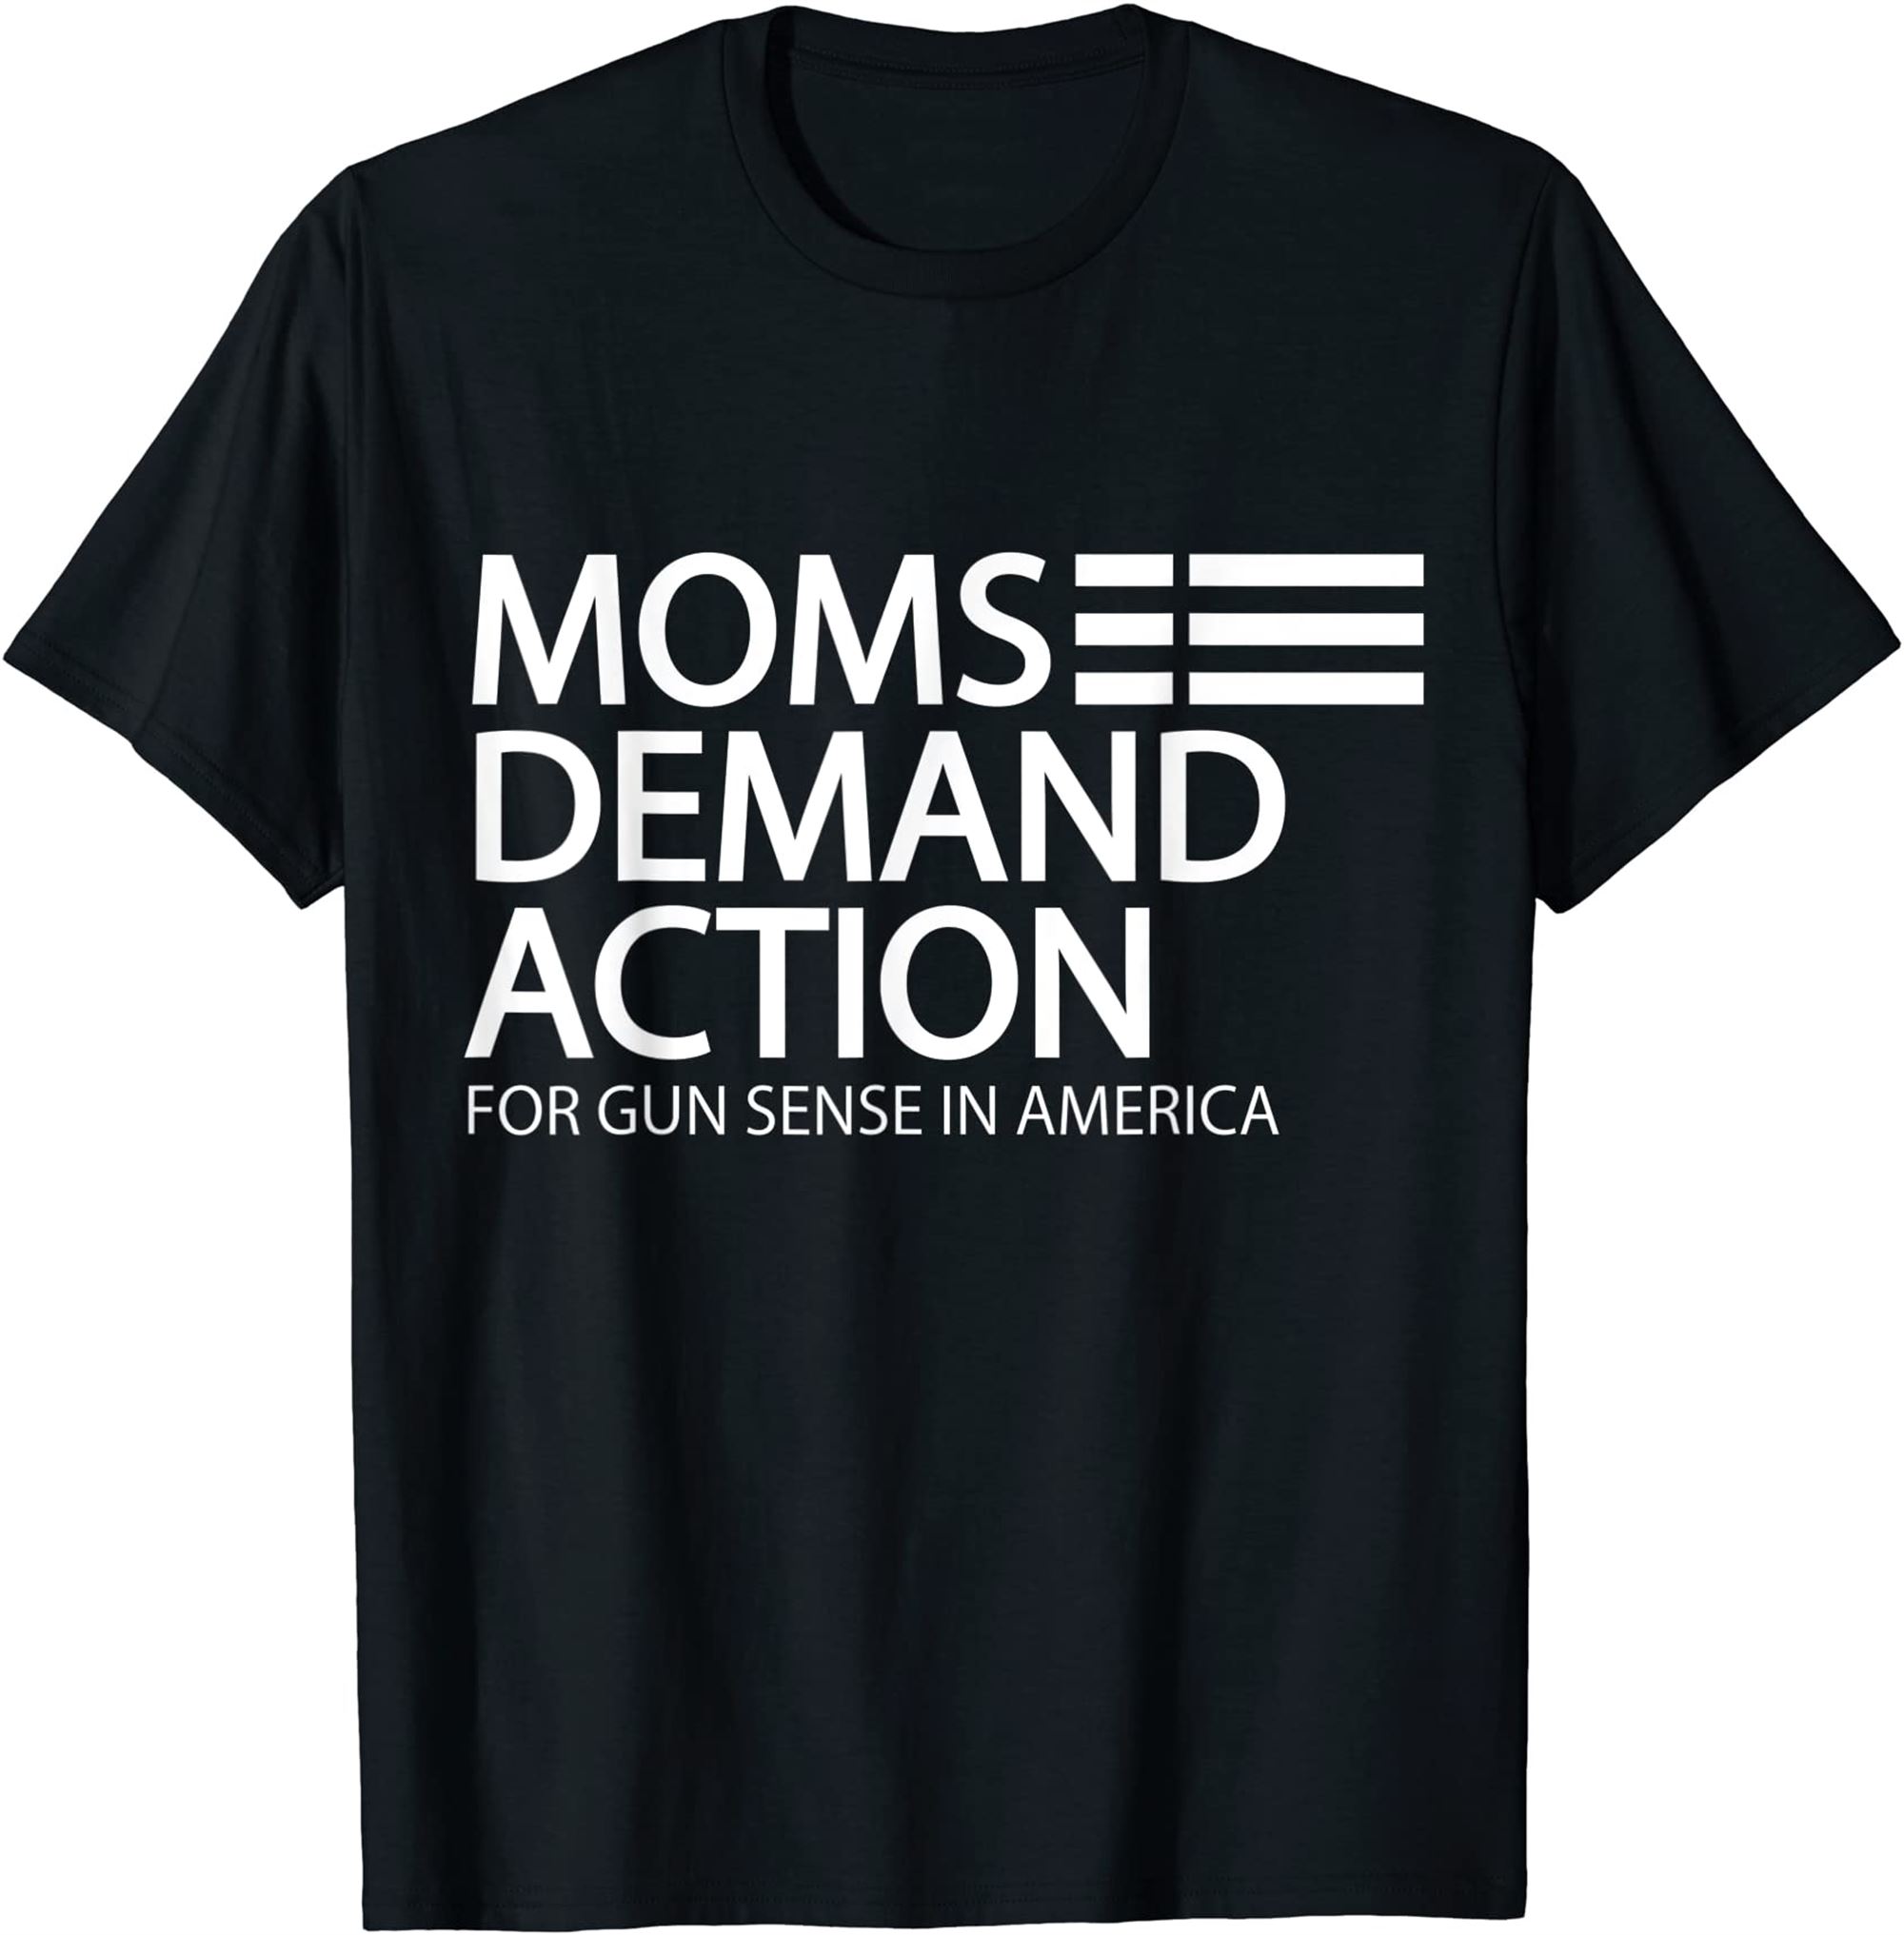 Mom Demand Action For Gun Sense In America T-shirt Size Up To 5xl